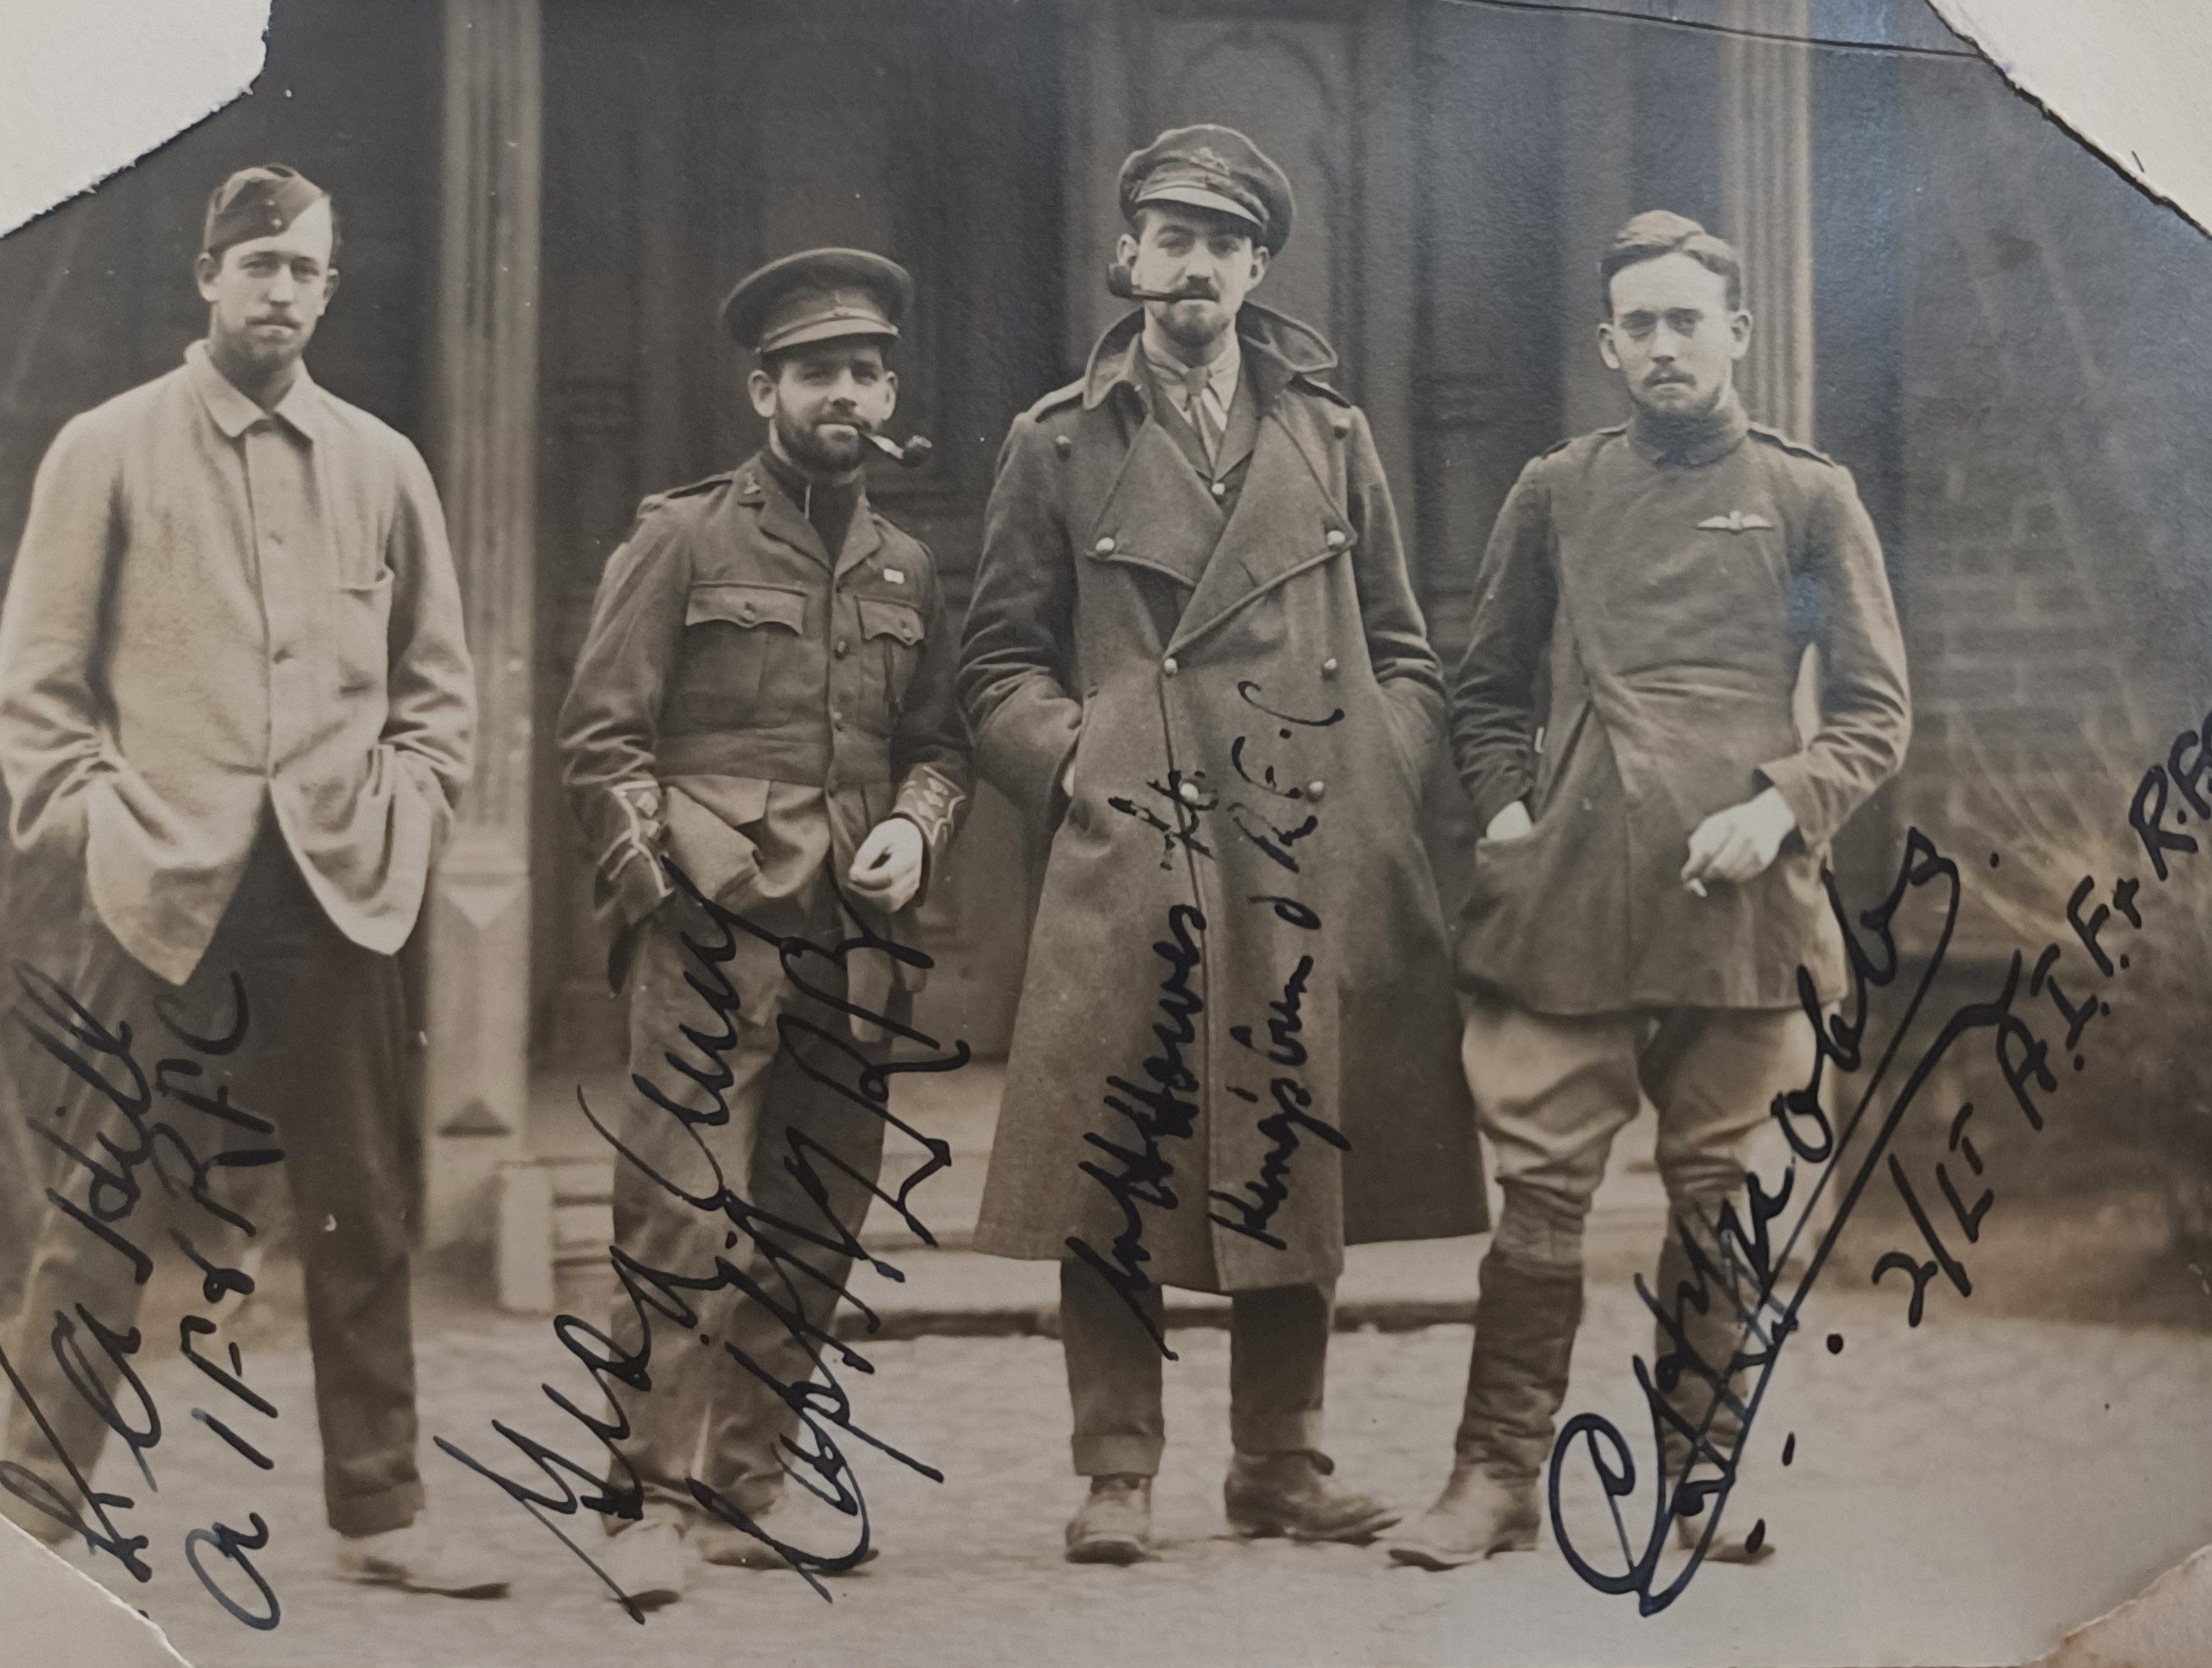 Signed photograph of a group of officers from Frederick Matthews' album